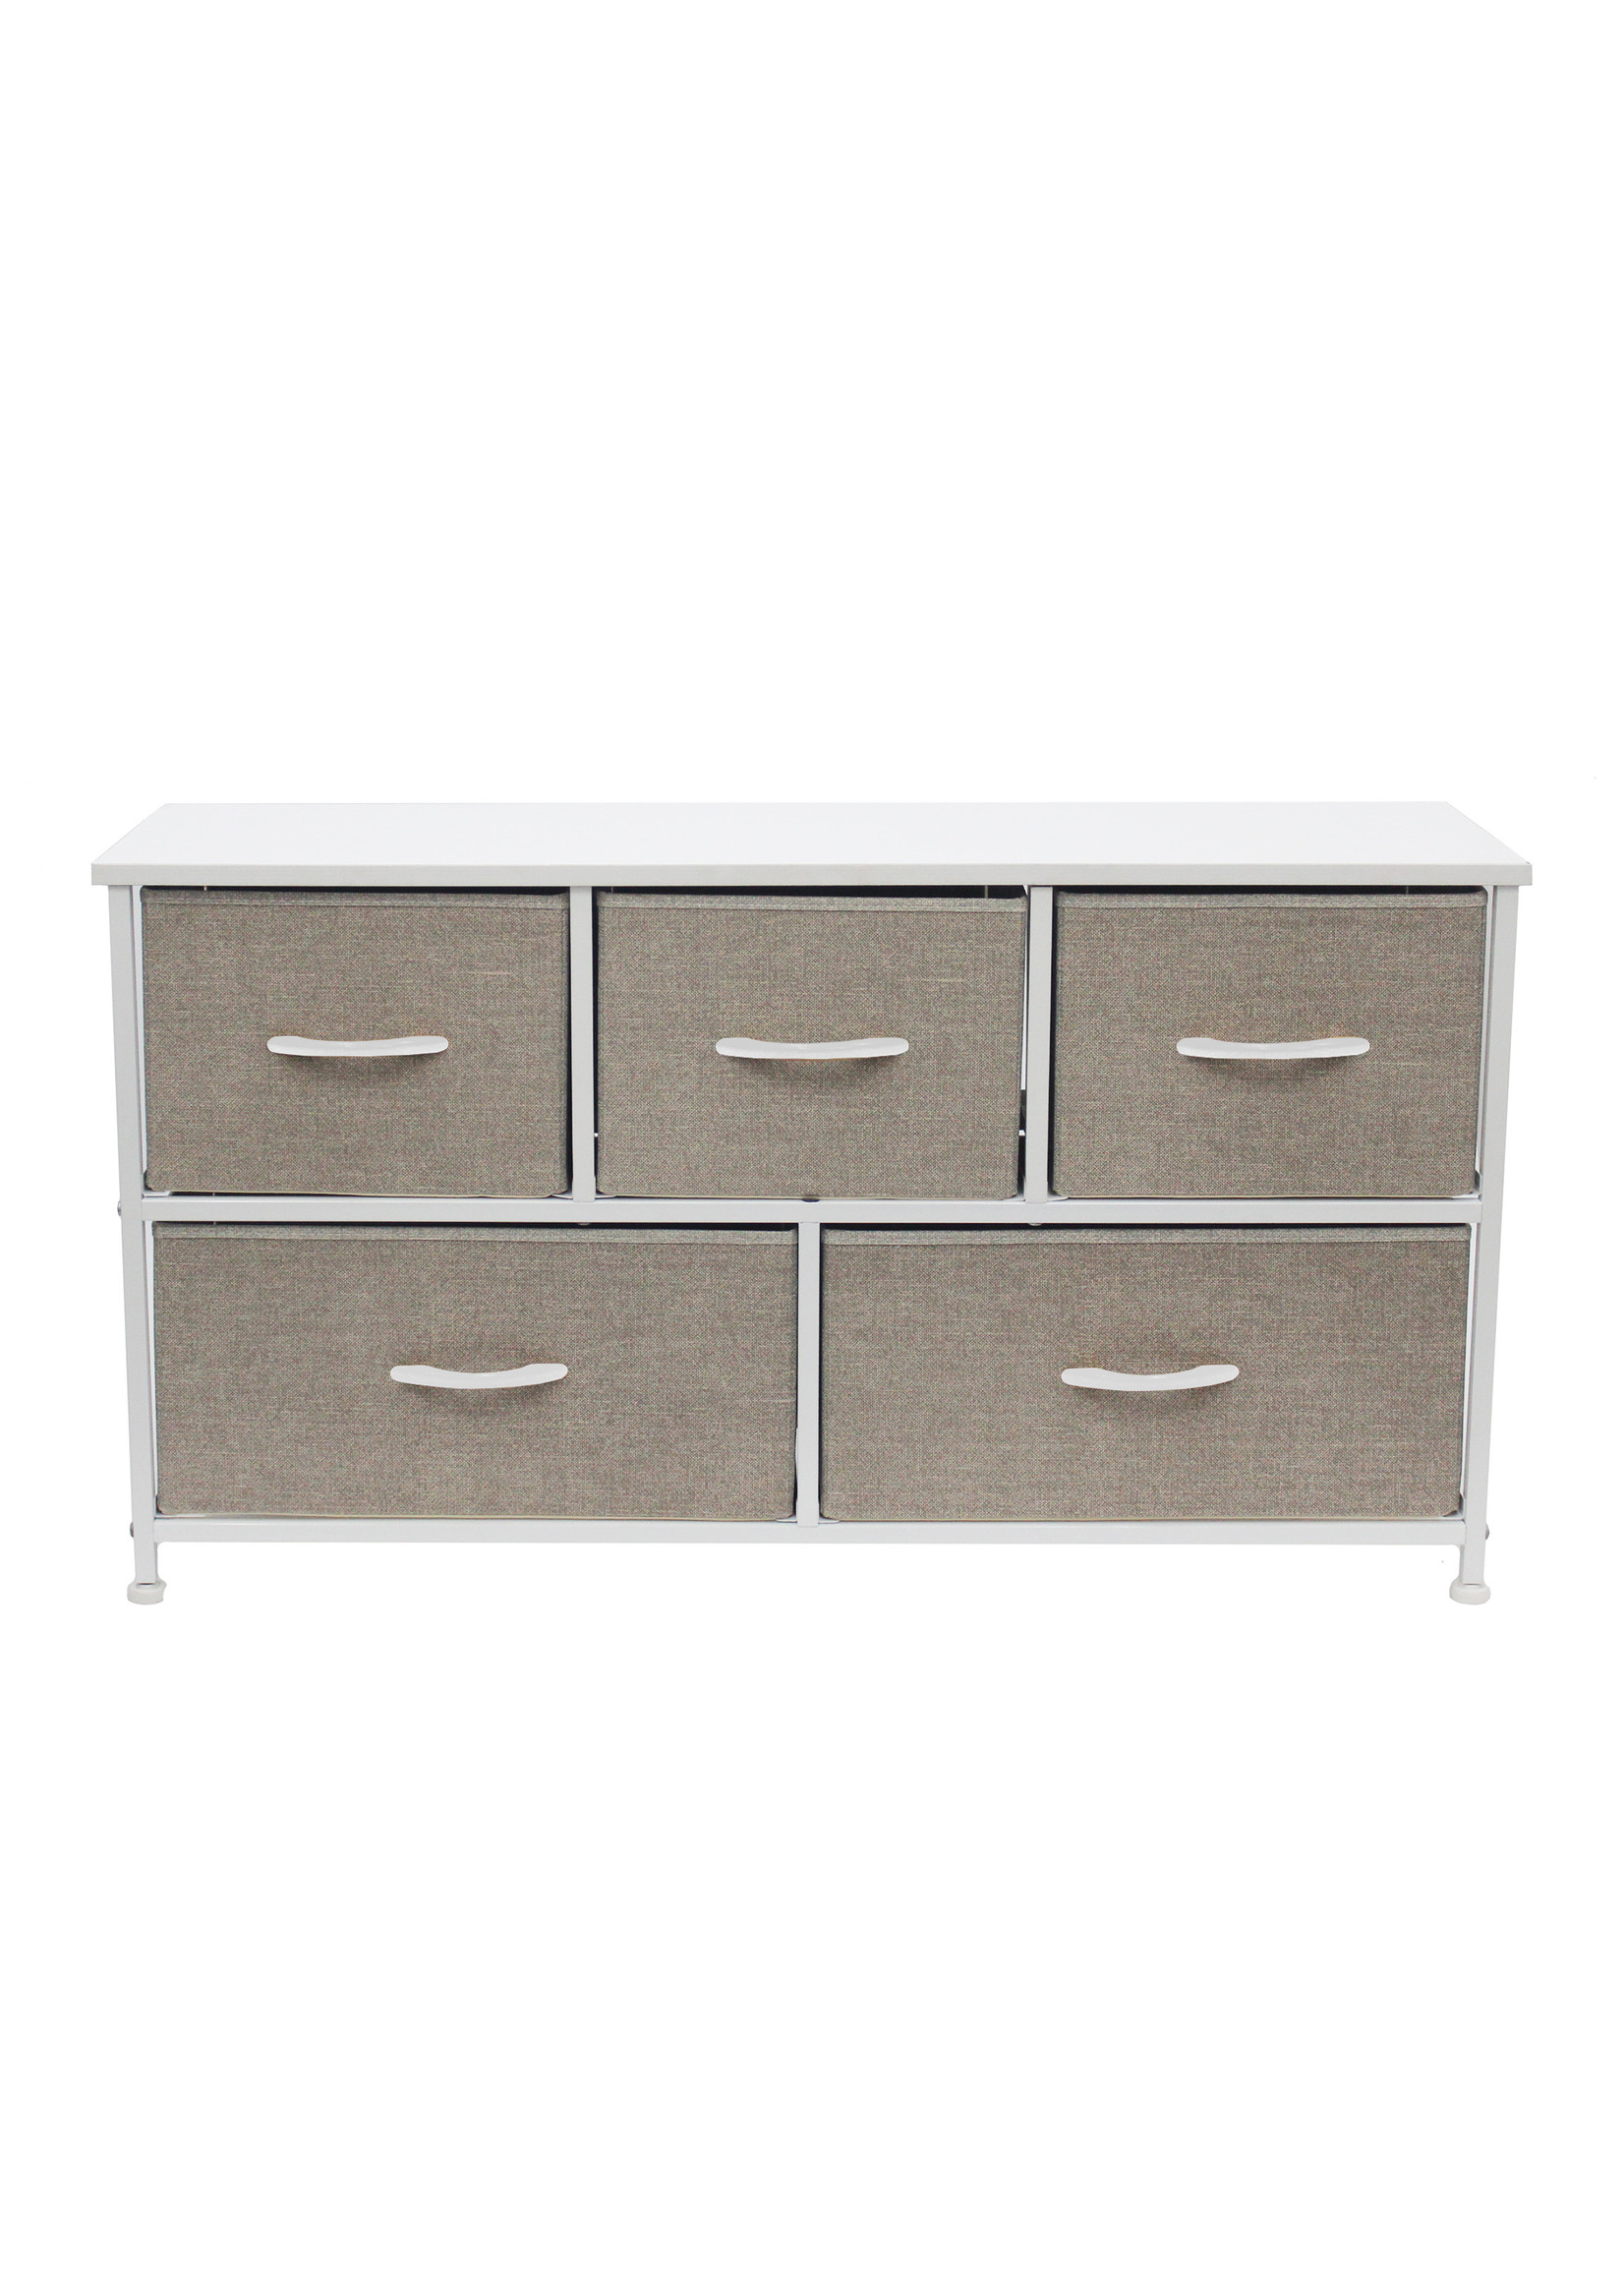 Nola Home Fabric Dresser Chest with 5 Drawer, Wide Storage Closet Organizer For Bedroom Living Room